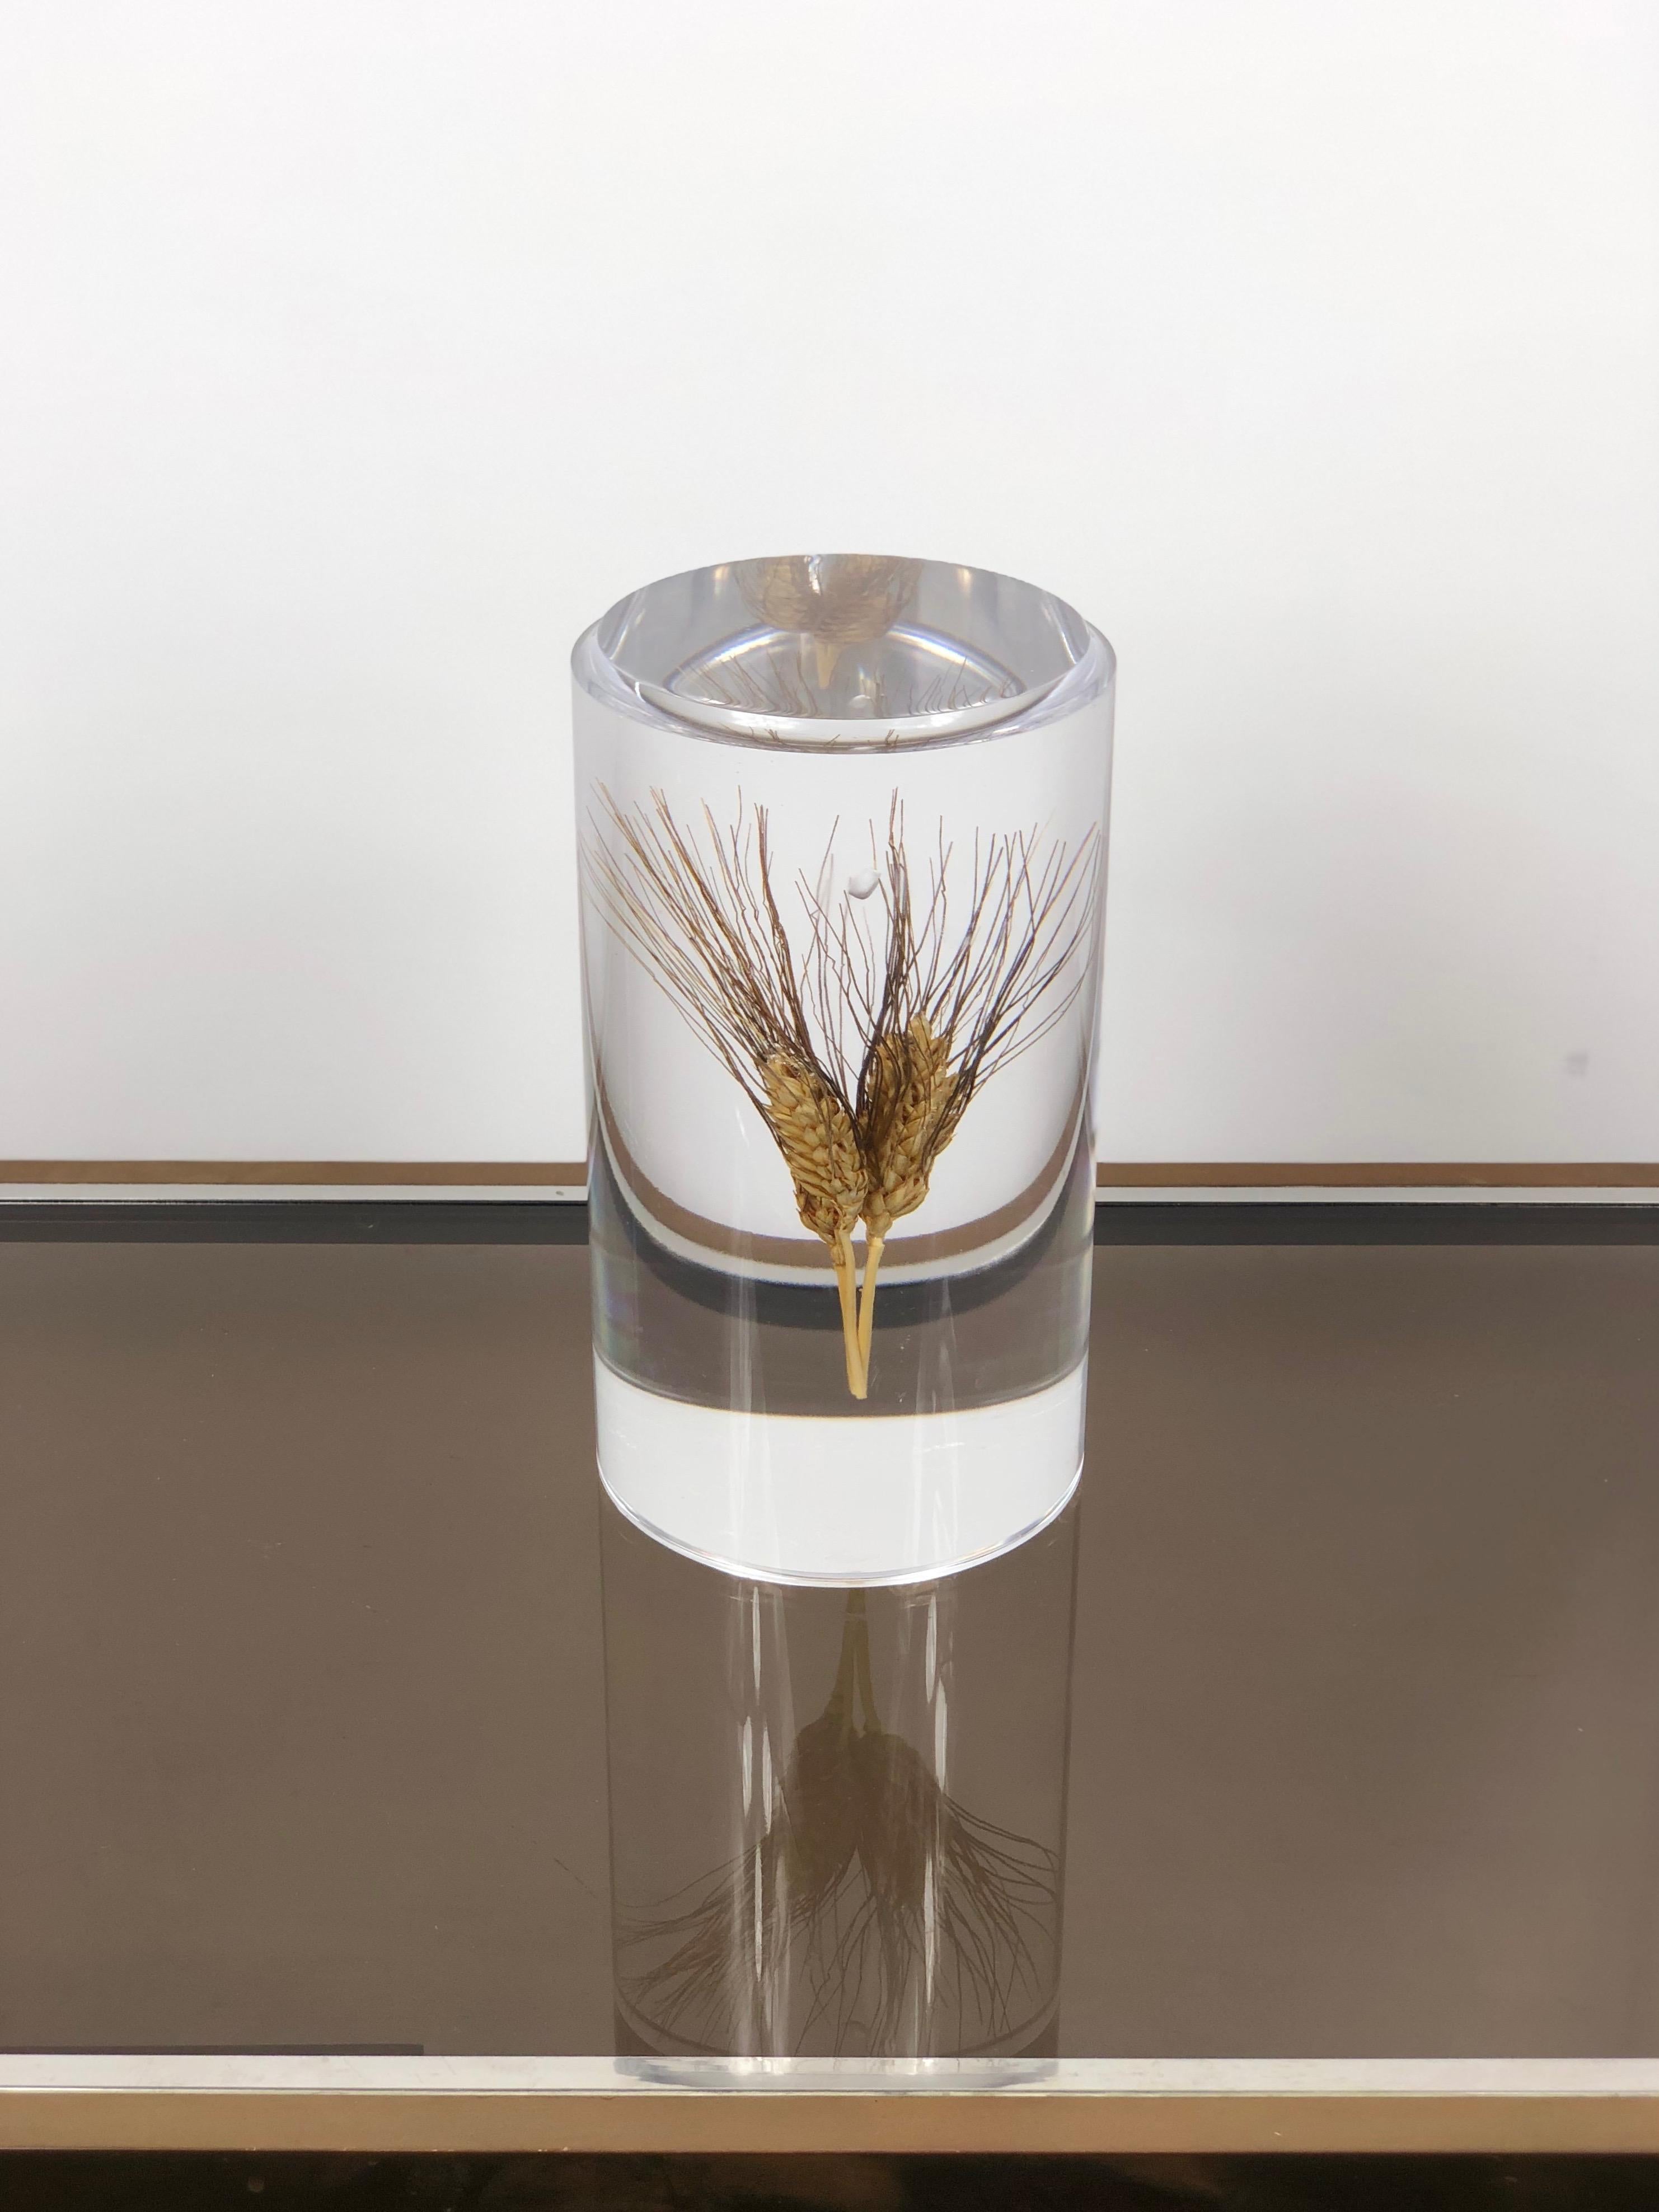 Acrylic sculpture in a cylindrical shape featuring inside an ear of wheat. The sculpture is in the Italian Modernist style and the conditions are excellent.